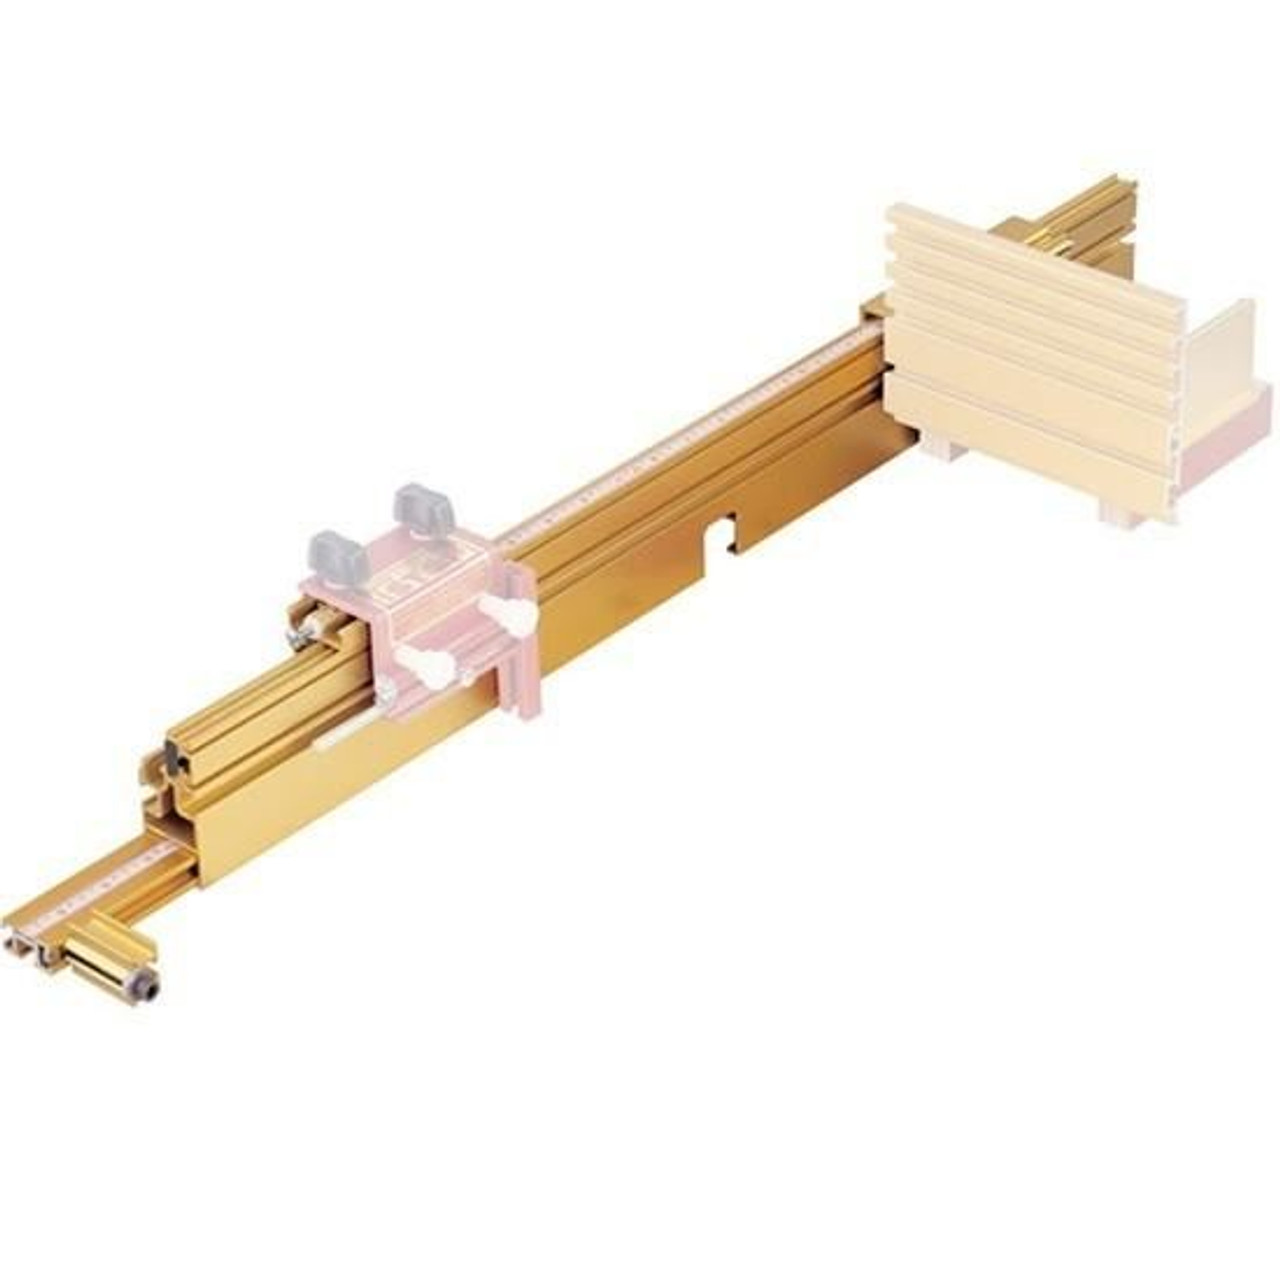 Incra WONDERFENCE37 Wonder Fence Router Table Fence by Incra - 5